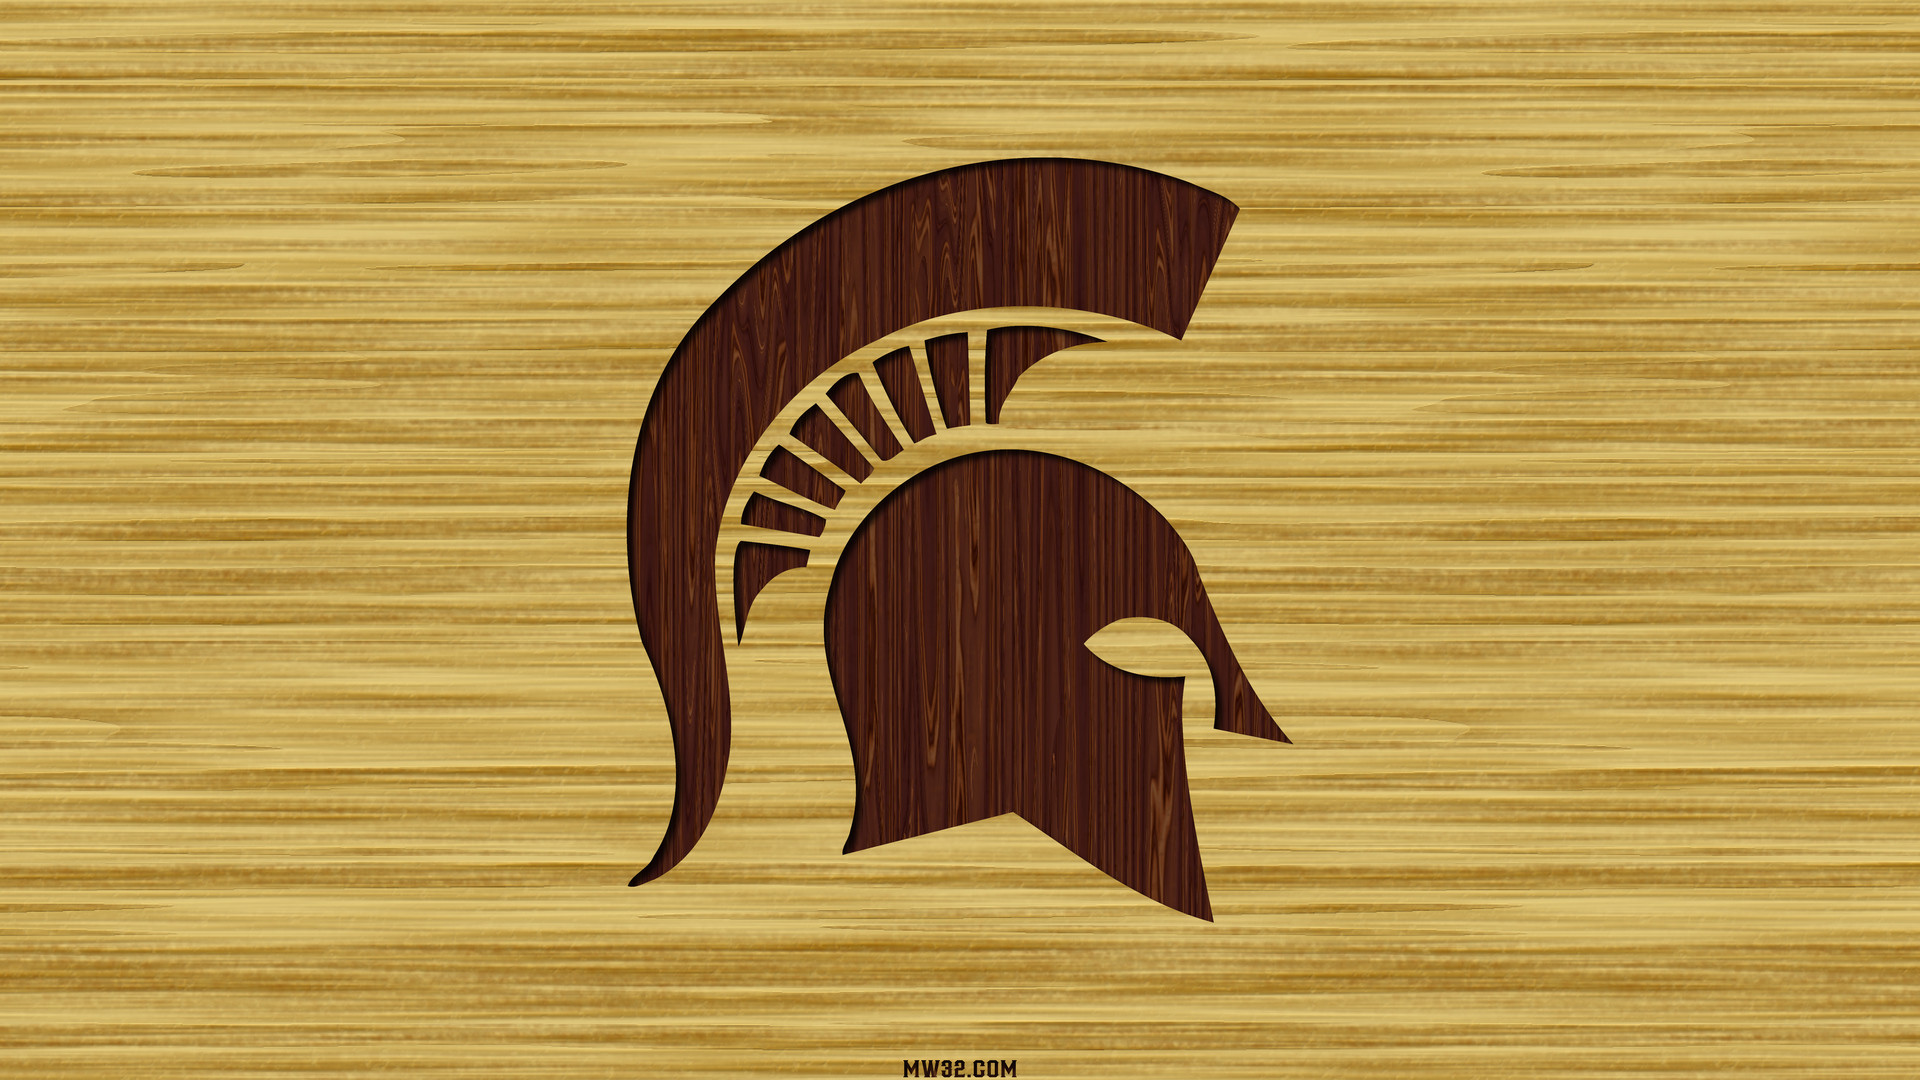 1920x1080 Michigan State Basketball Court Wallpaper Images Pictures Becuo 